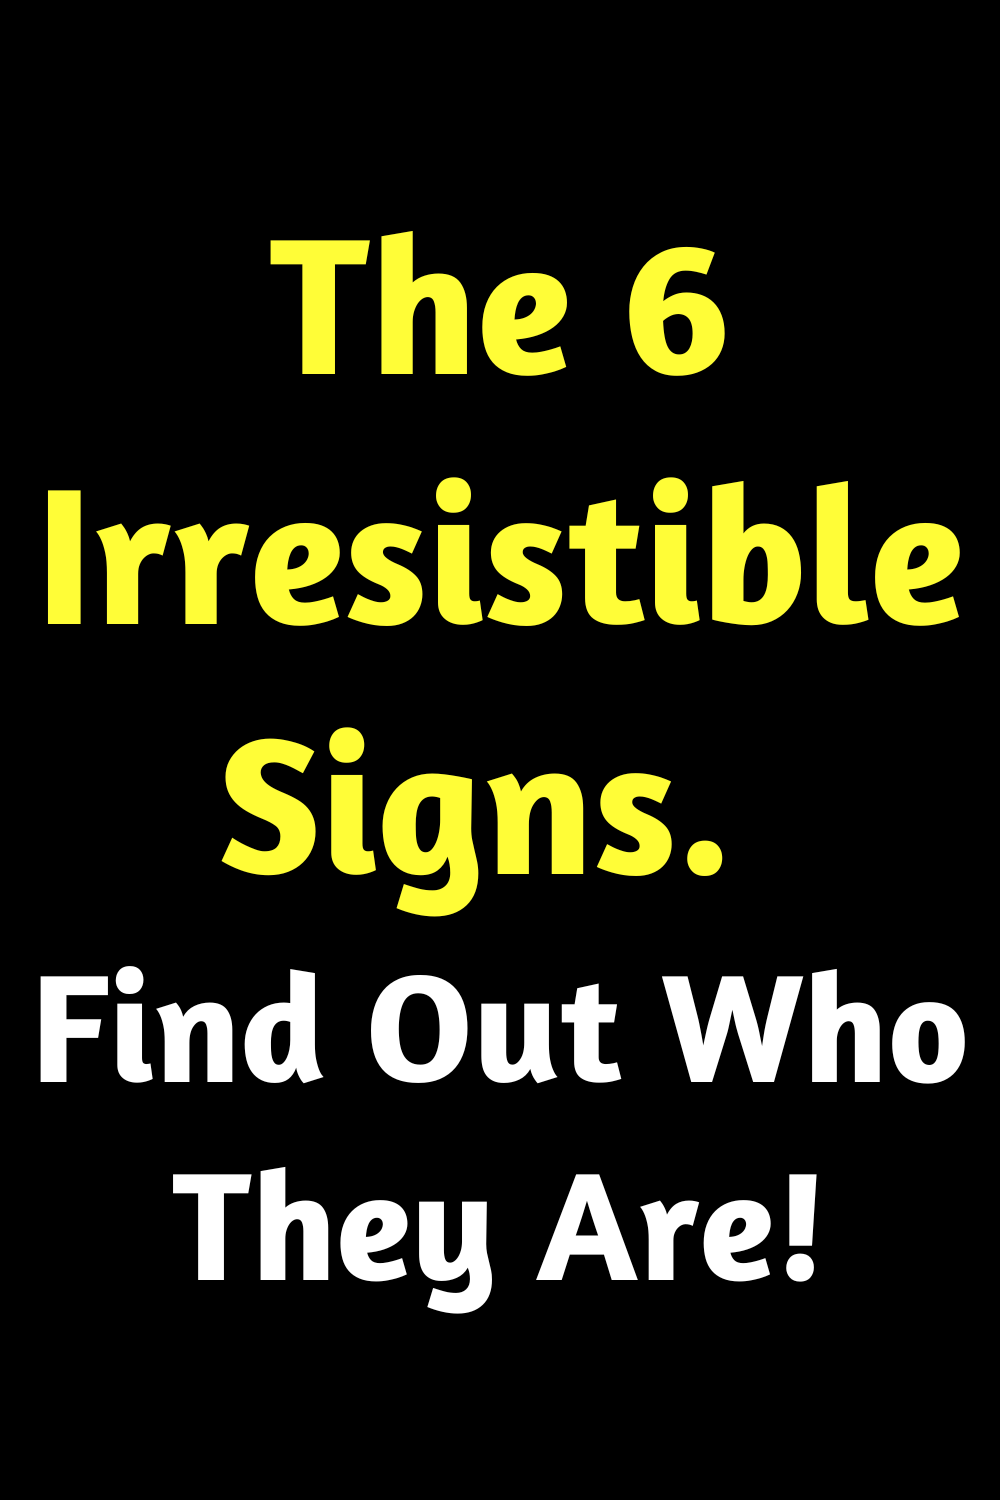 The 6 Irresistible Signs. Find Out Who They Are!